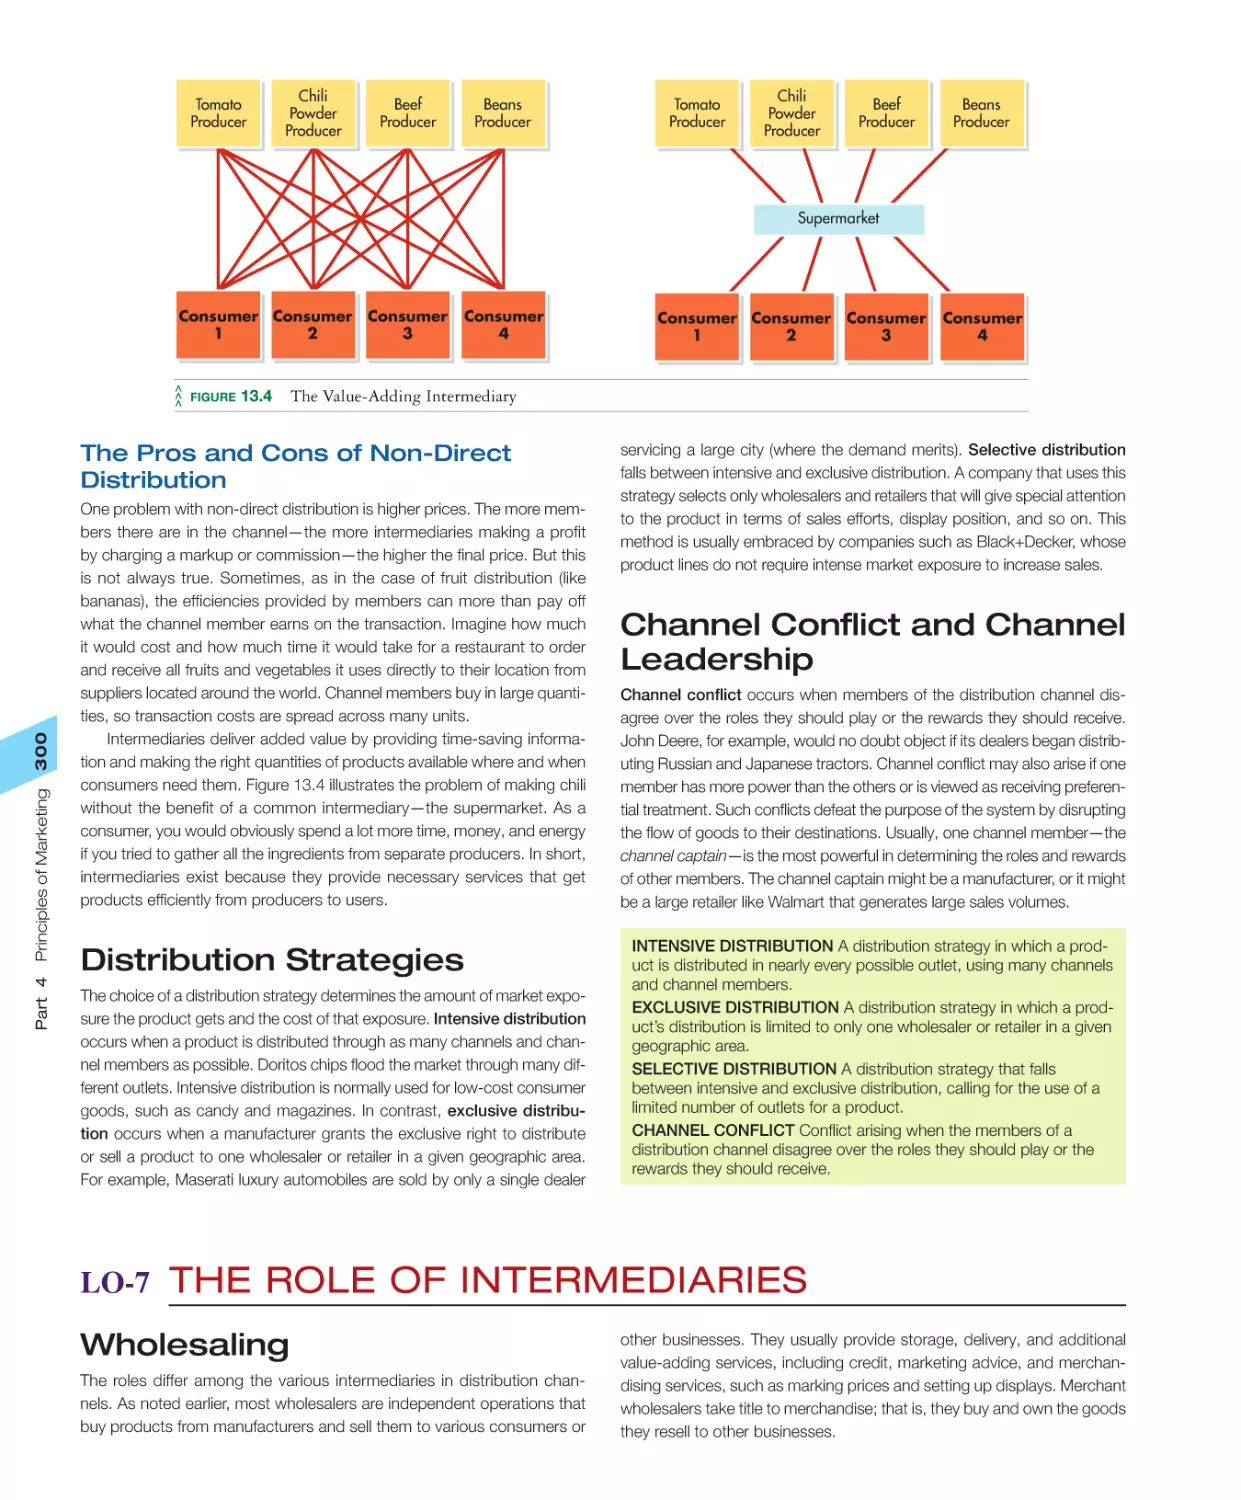 Distribution Strategies
Channel Conflict and Channel Leadership
LO‐7 The Role of Intermediaries